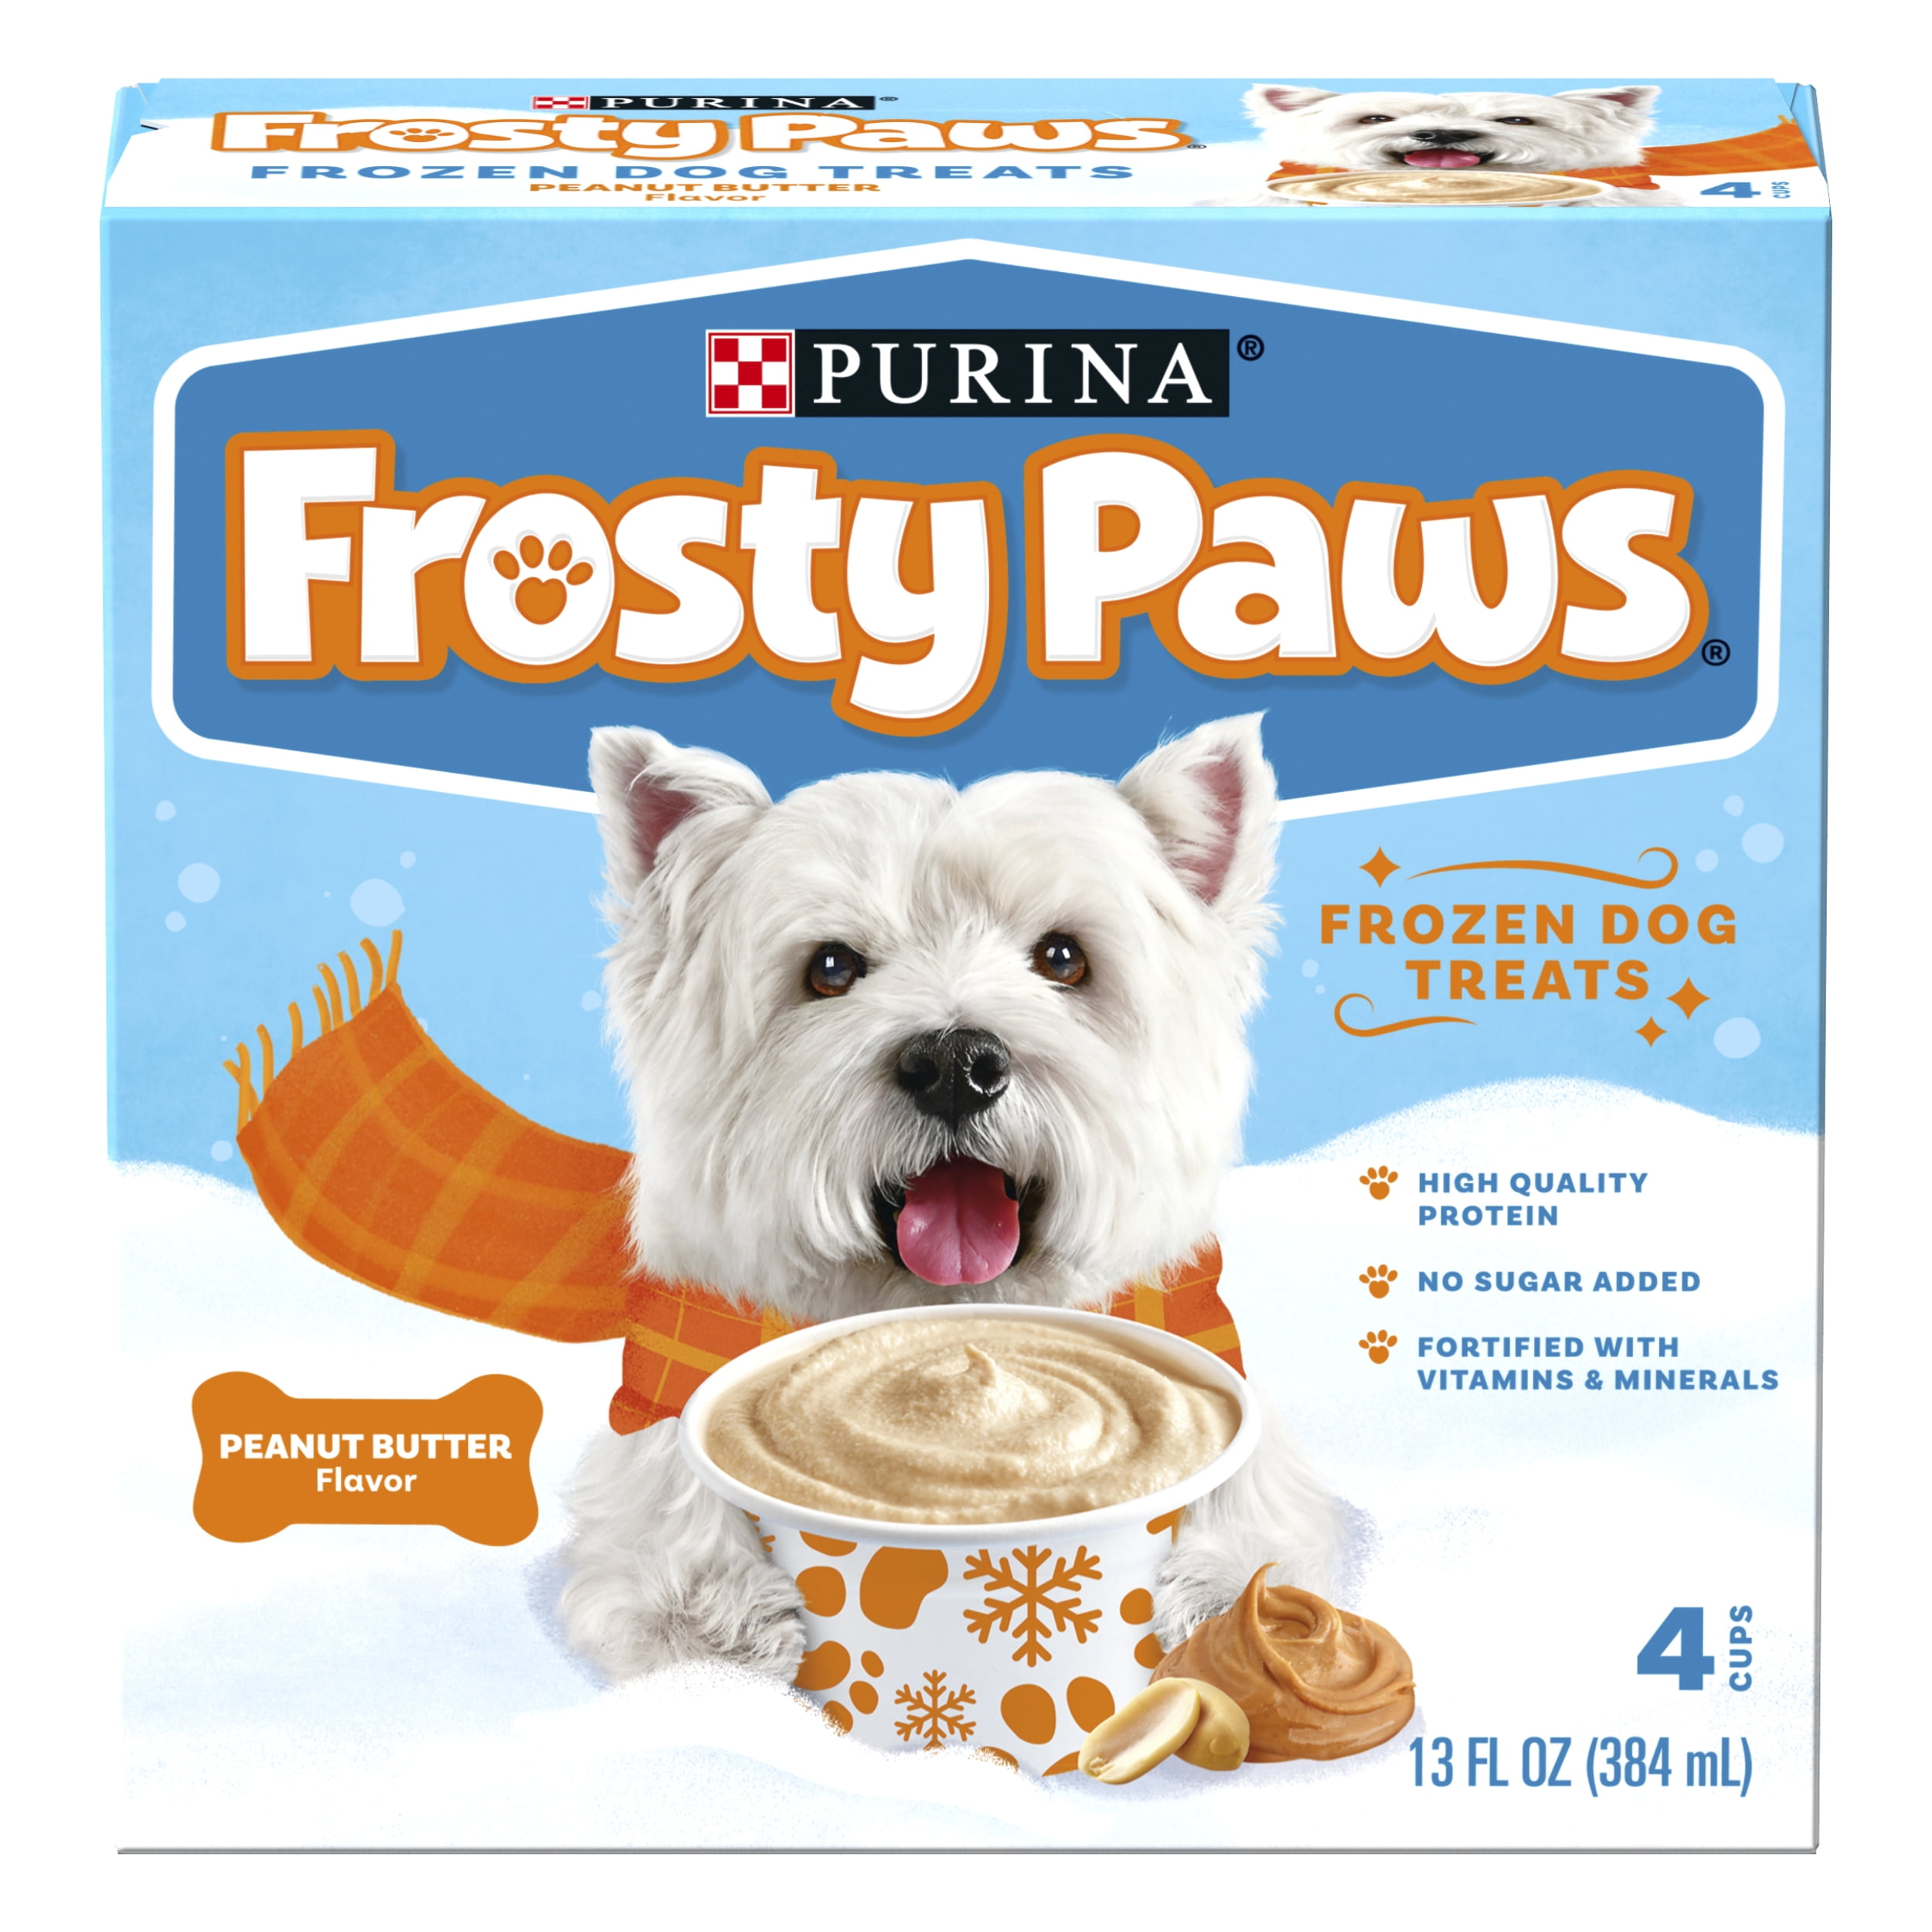 Official Frosty Paws®, Ice Cream for Dogs